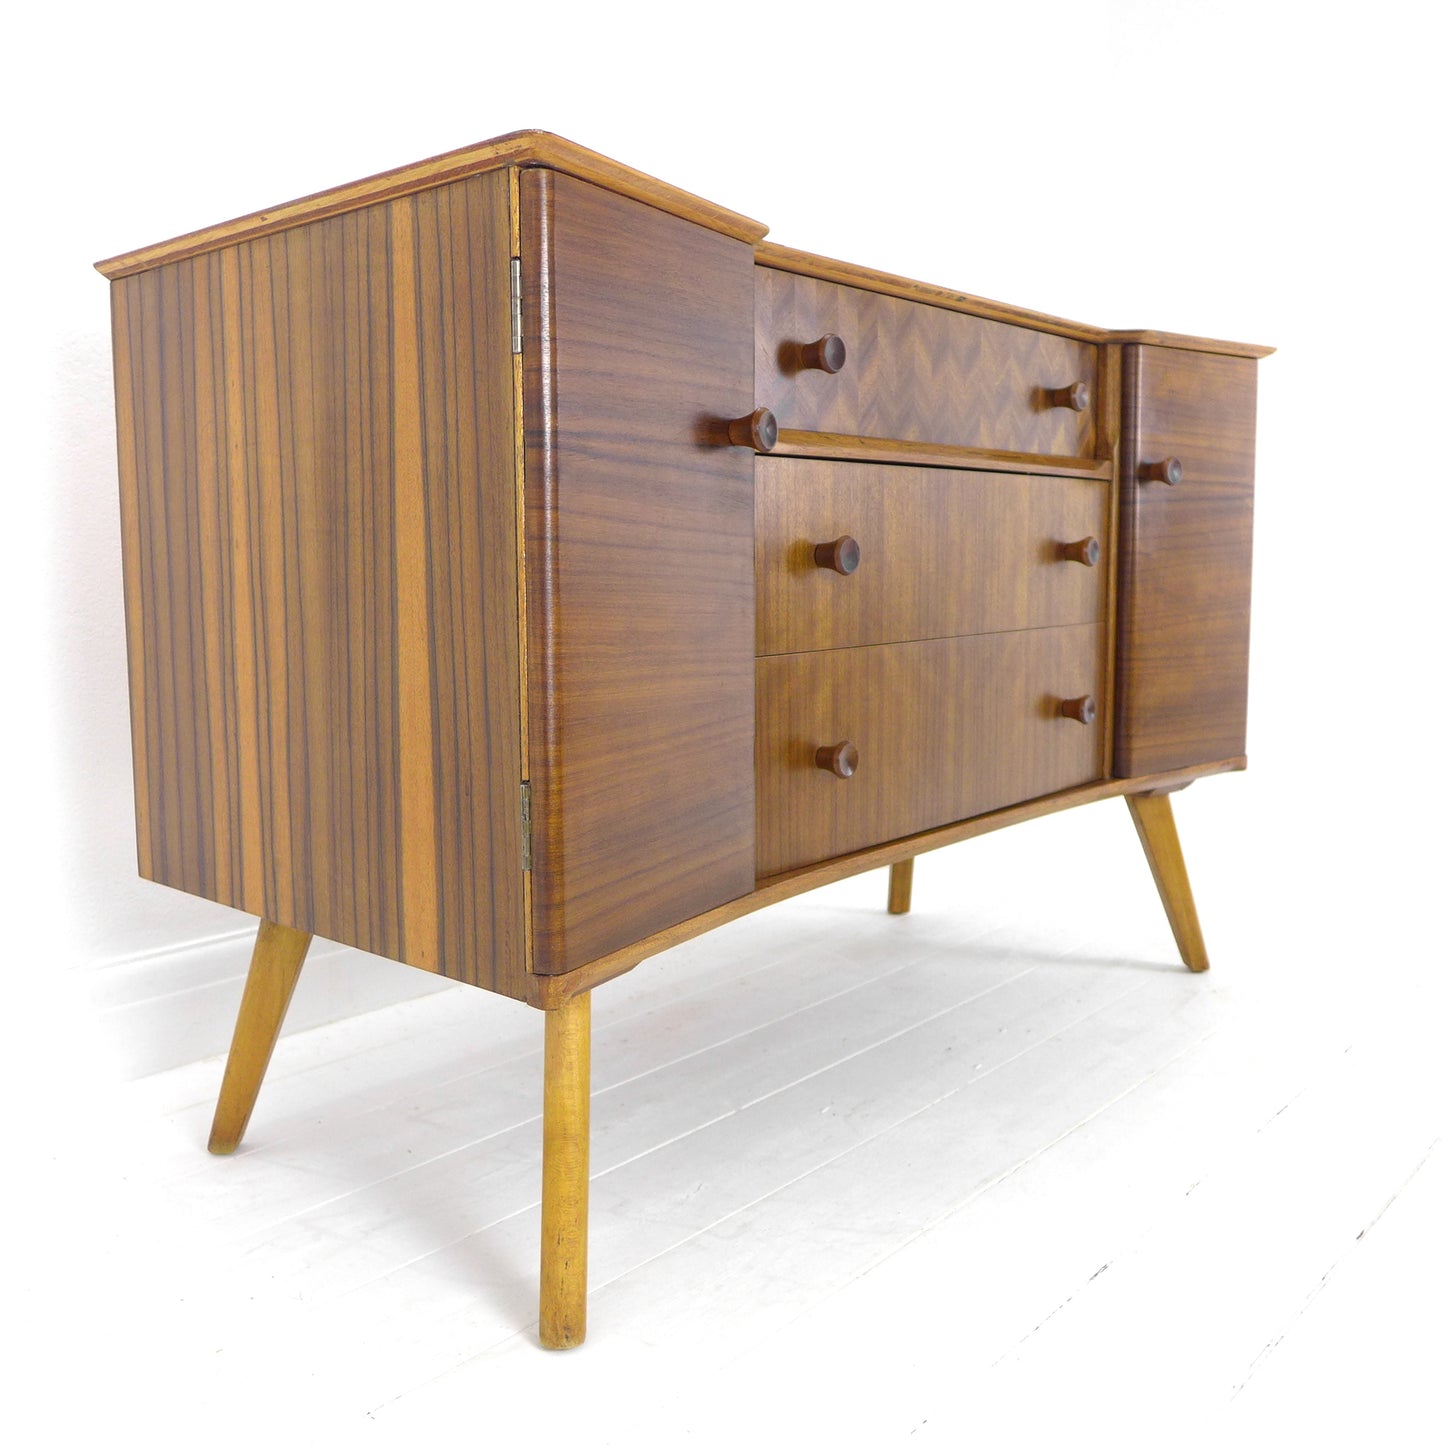 Mid Century Teak Sideboard with Veneer Detail - Record/Drinks Cabinet - Compact Size